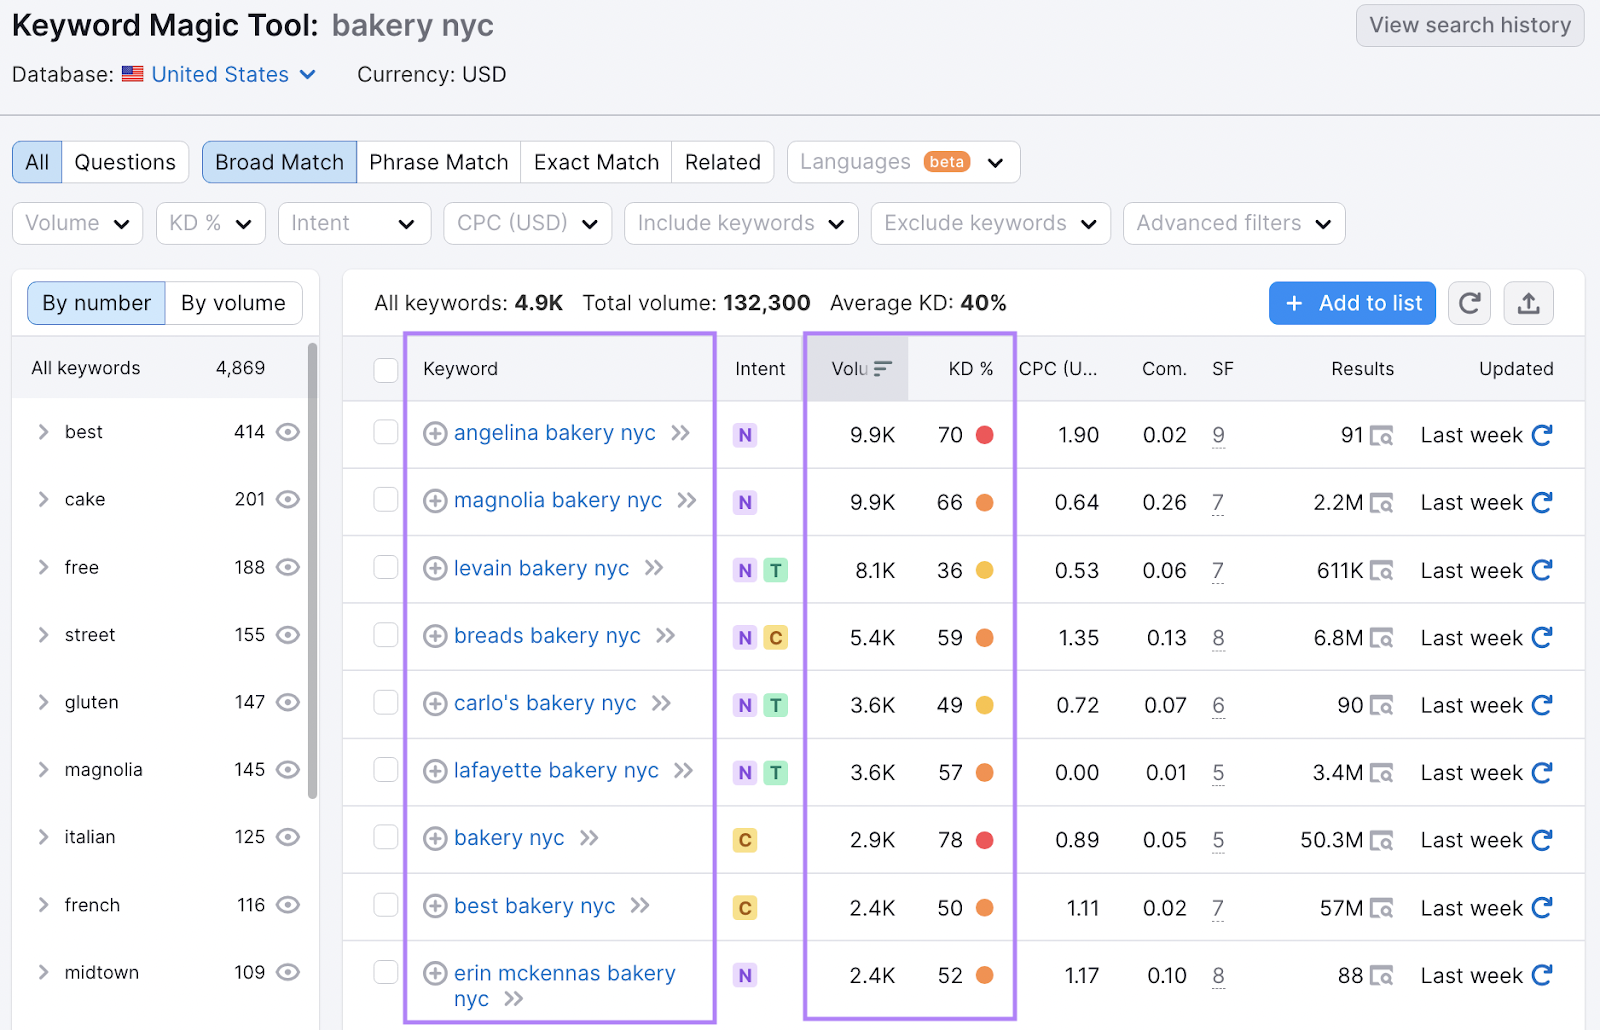 Keyword Magic Tool returns the list of potential keywords related to "bakery nyc" and their key metrics, such as intent, volume and keyword difficulty